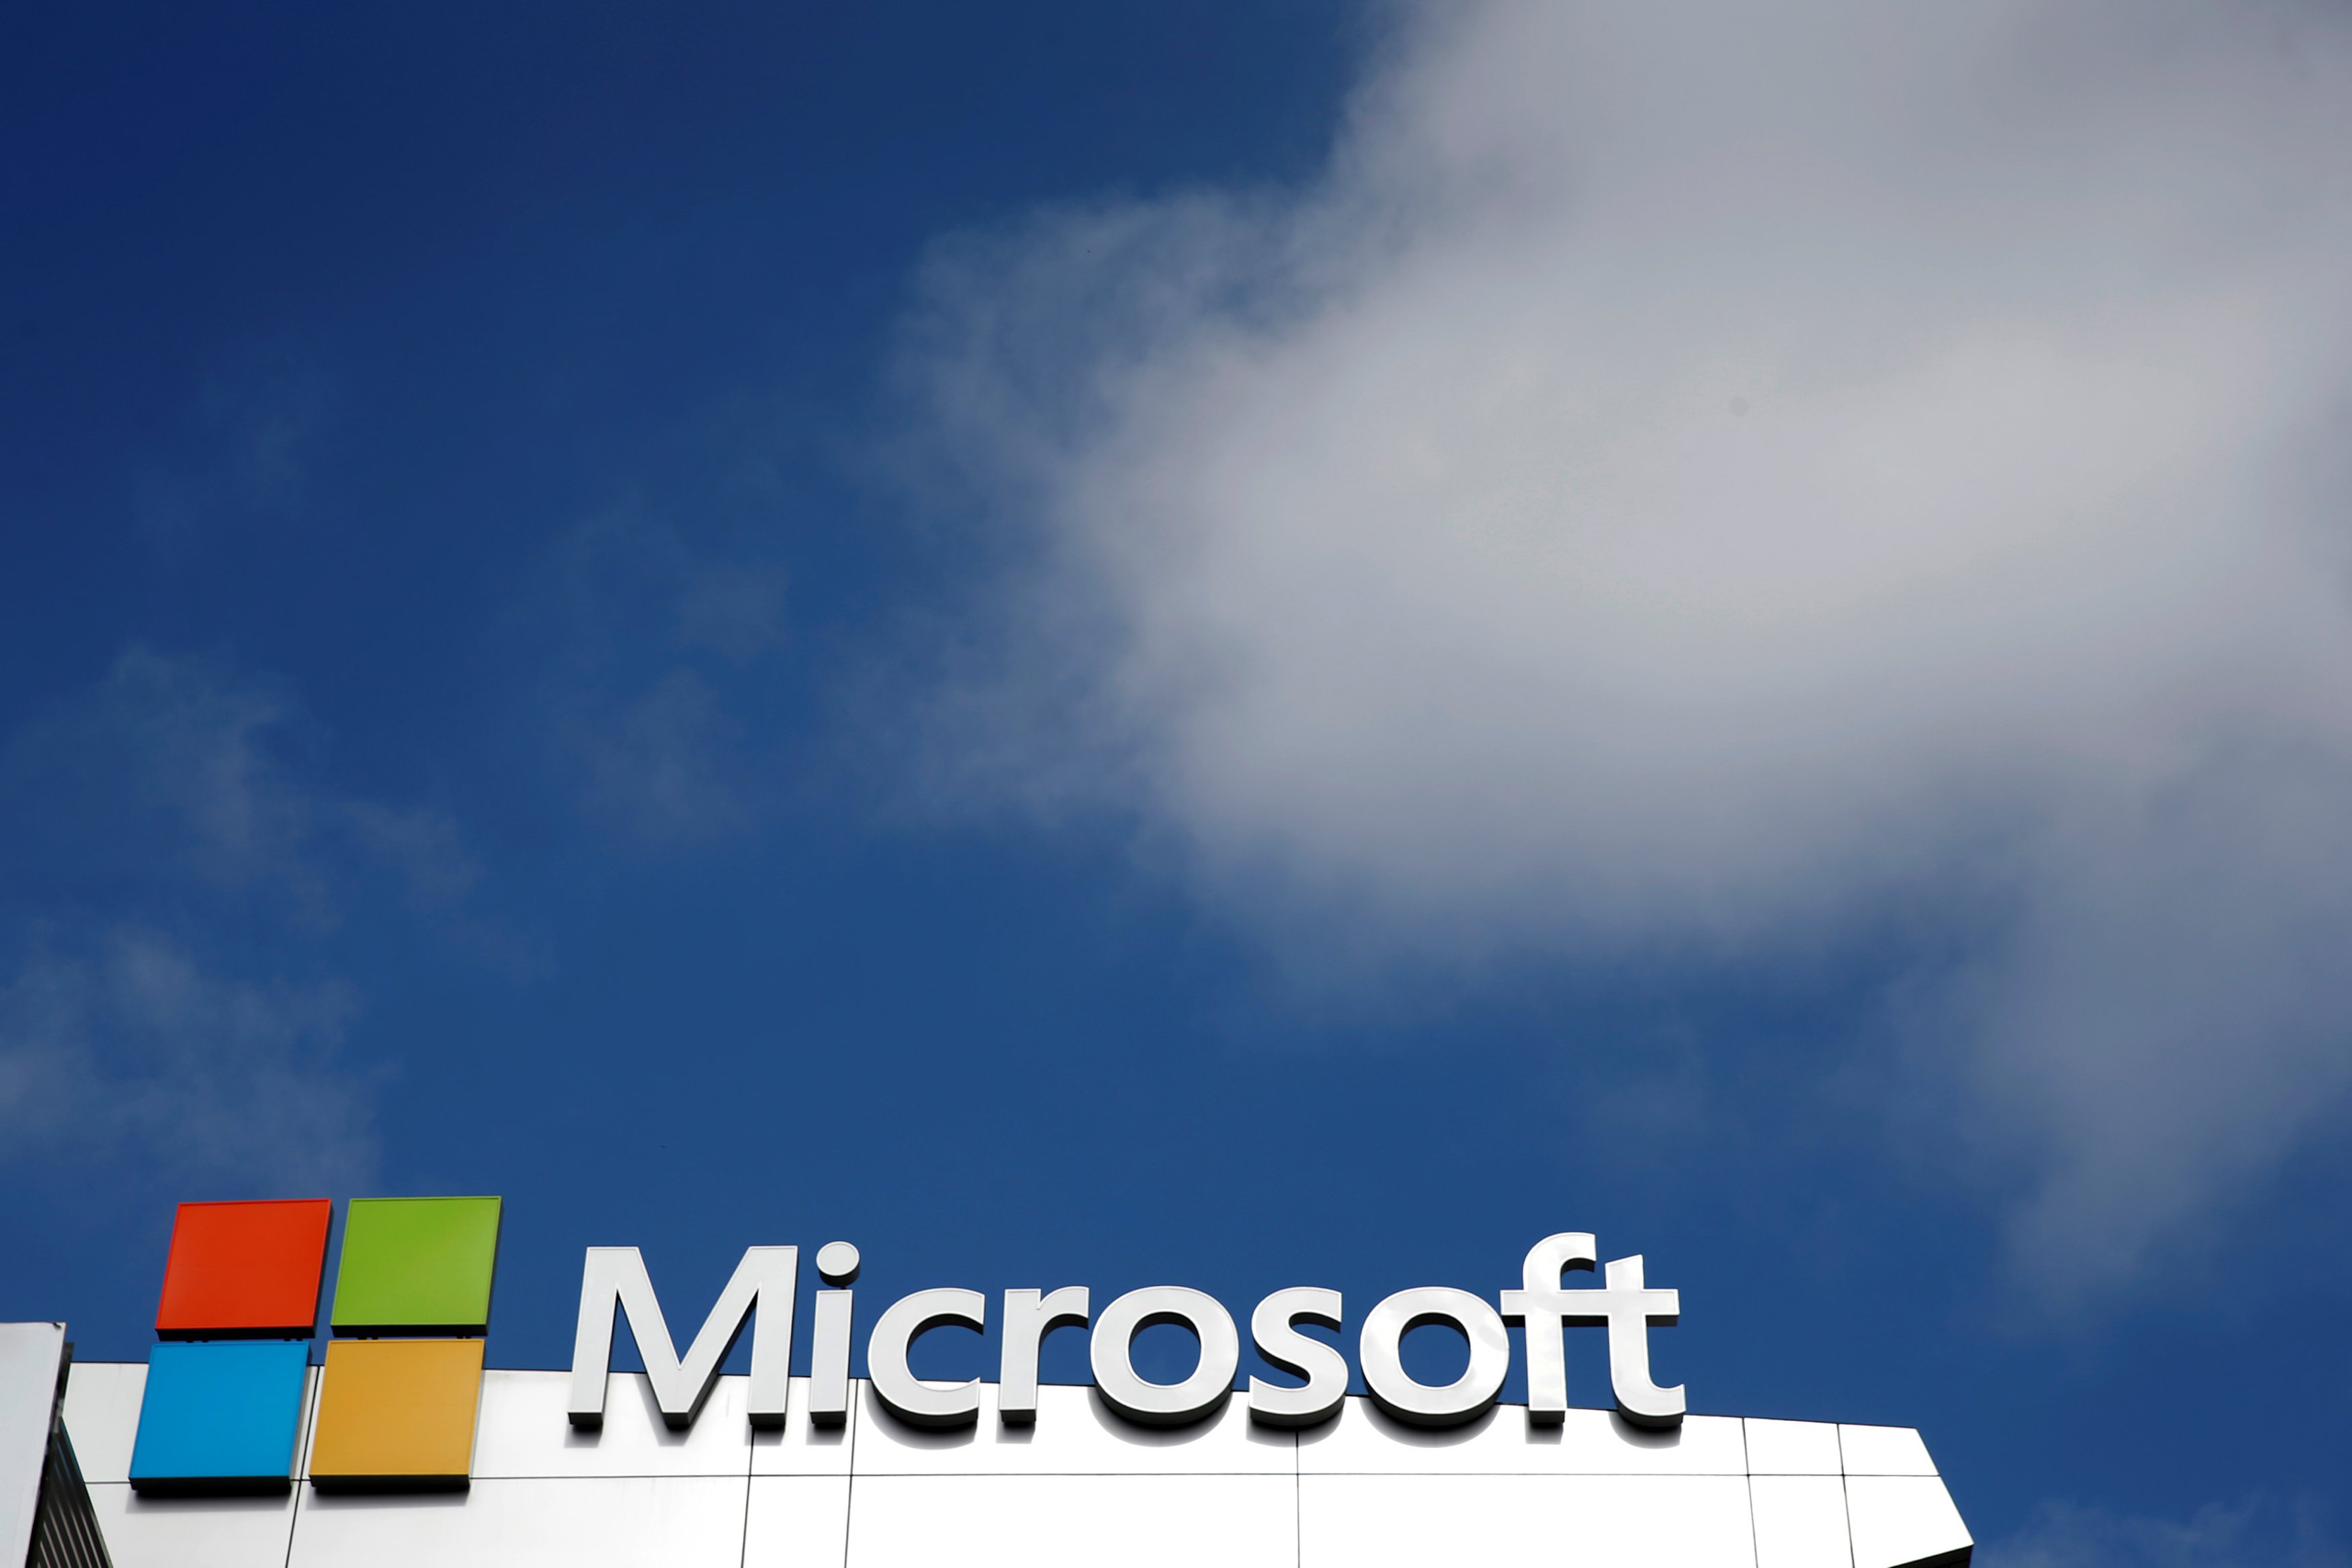 A Microsoft logo is seen next to a cloud the day after Microsoft Corp's $26.2 billion purchase of LinkedIn Corp, in Los Angeles on June 14, 2016. (Lucy Nicholson—Reuters)